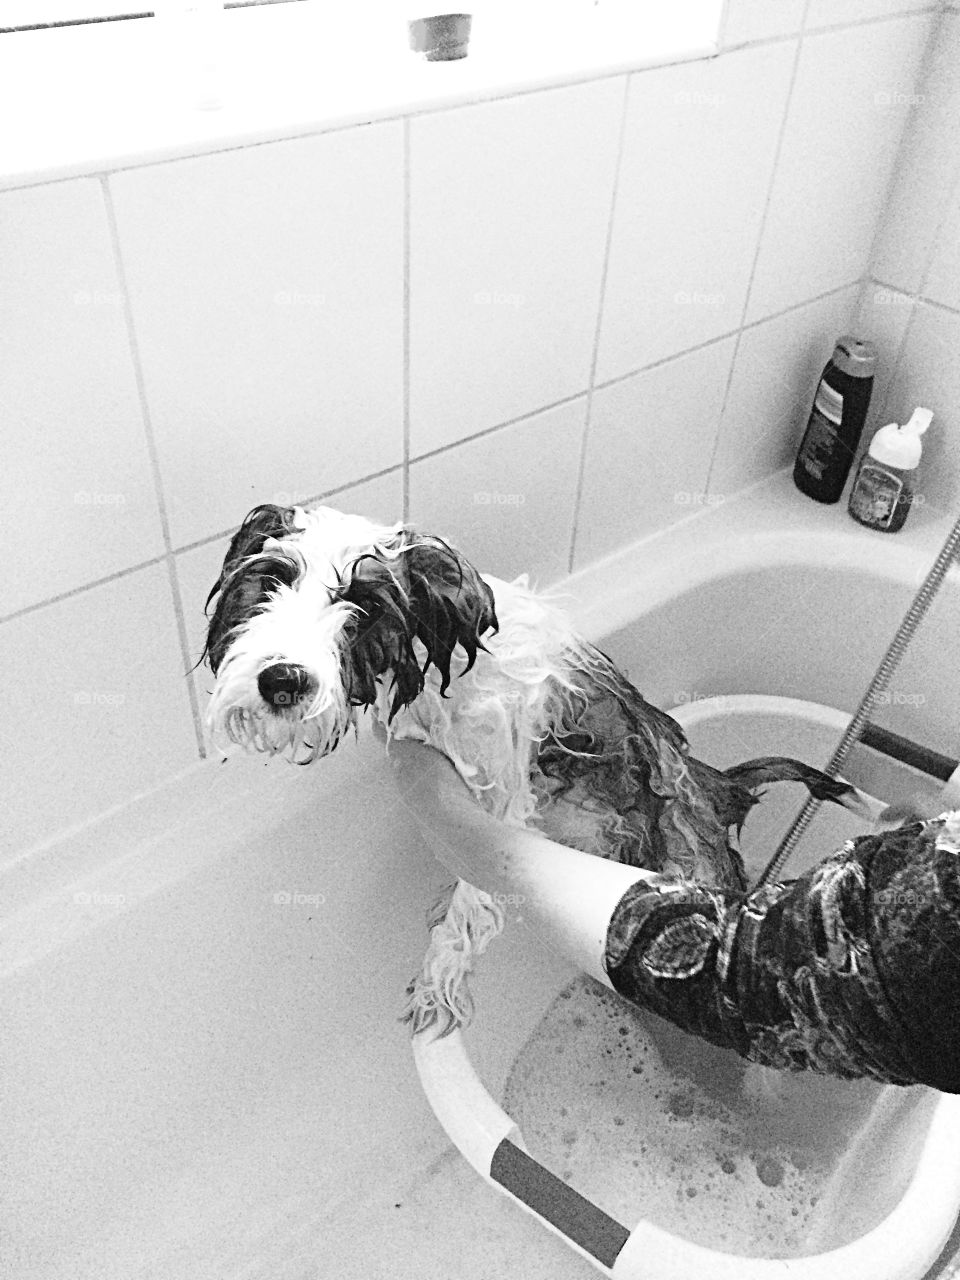 Why must you bathe me human?